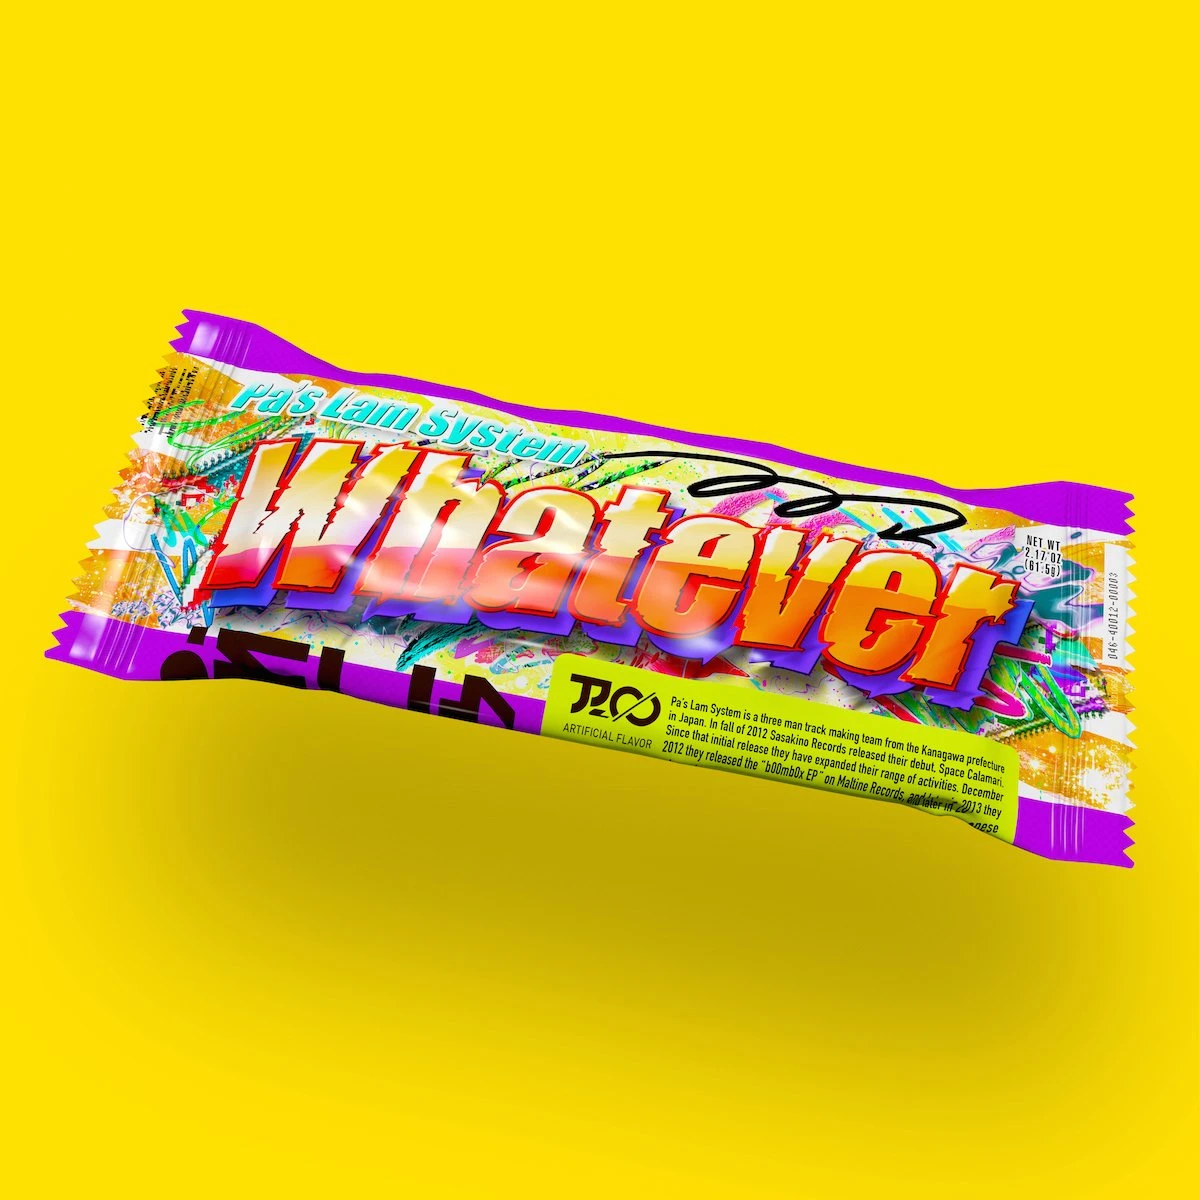 Pa's Lam System『Whatever』